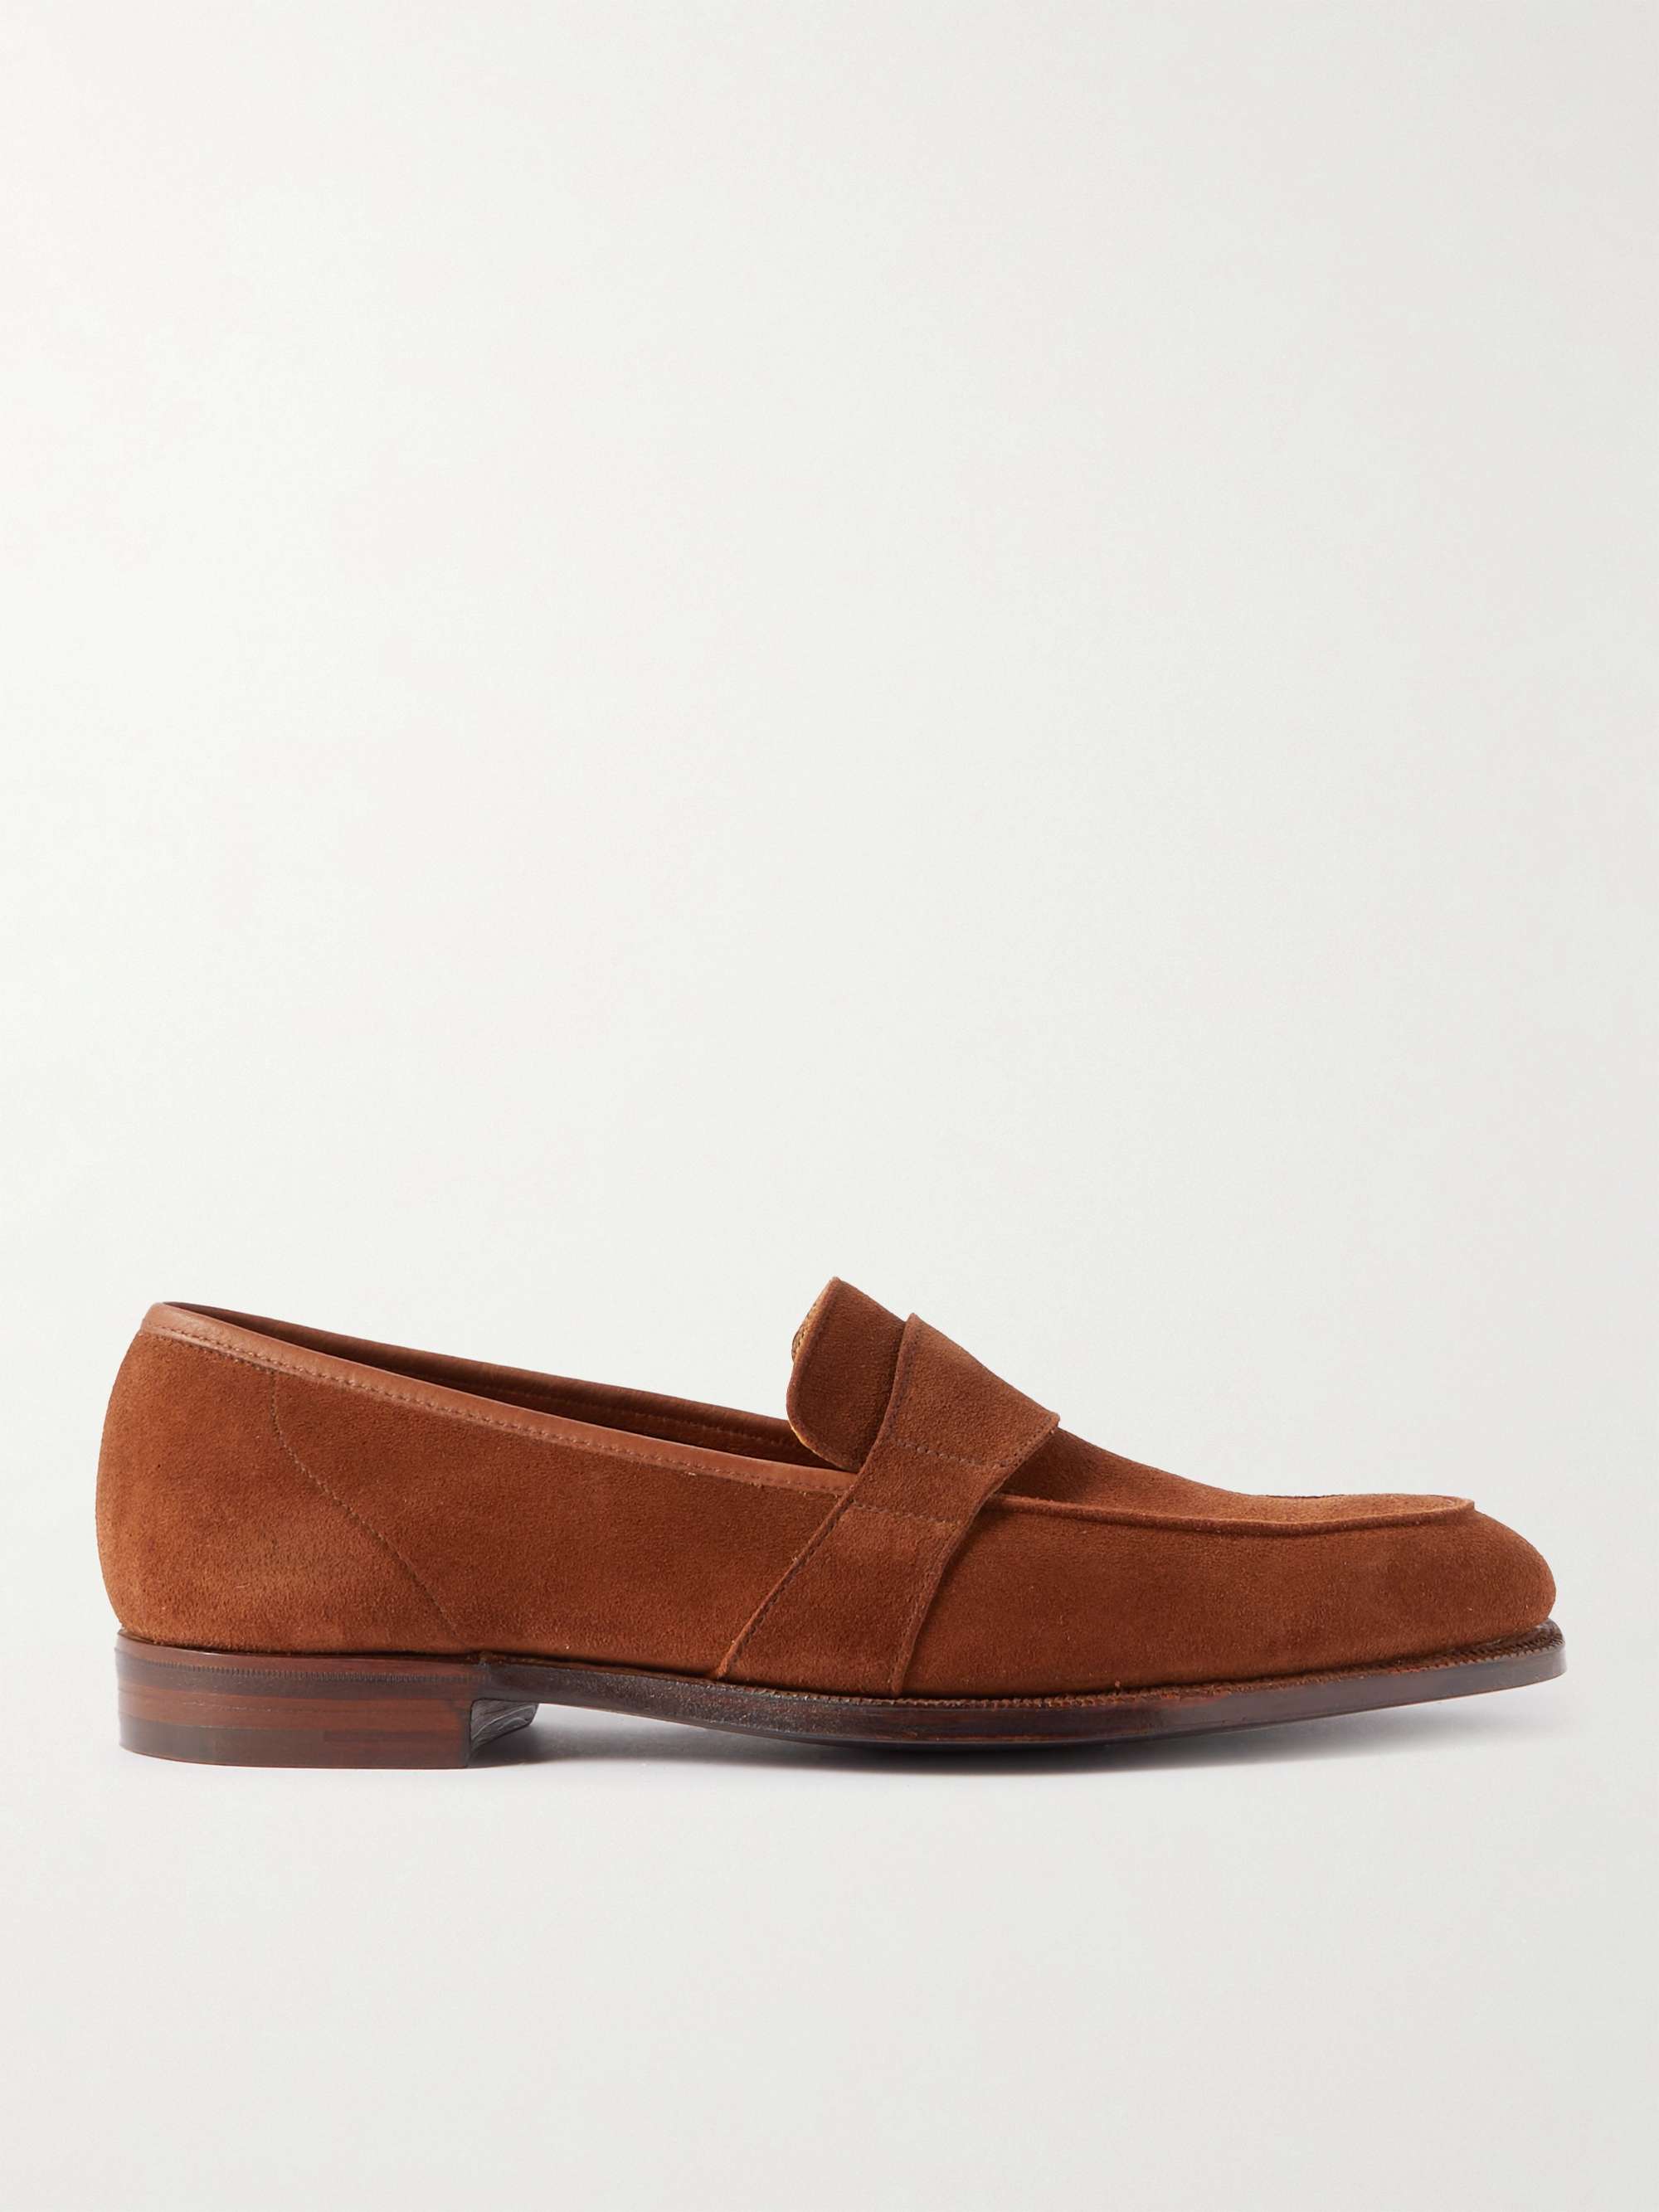 GEORGE CLEVERLEY Owen Suede Penny Loafers